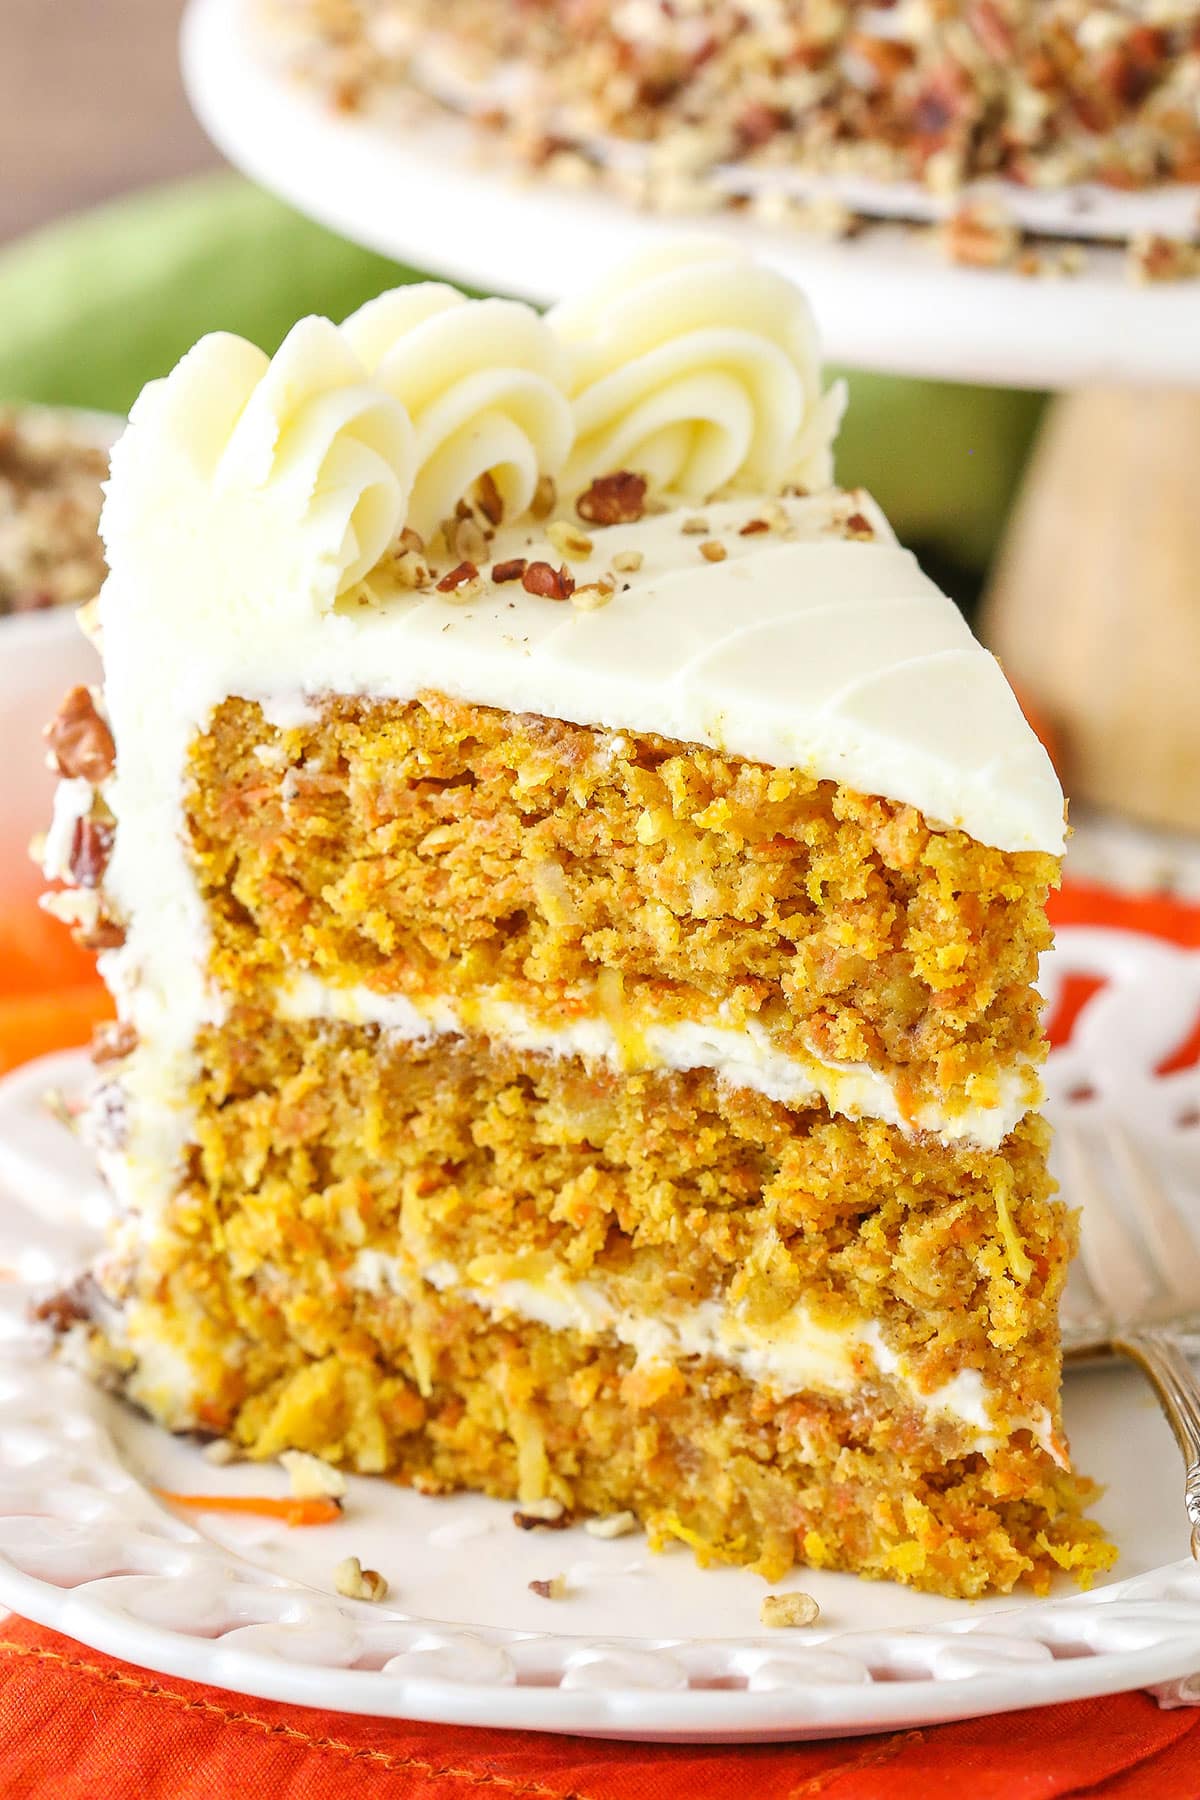 A slice of Carrot Cake next to a silver fork on a white plate